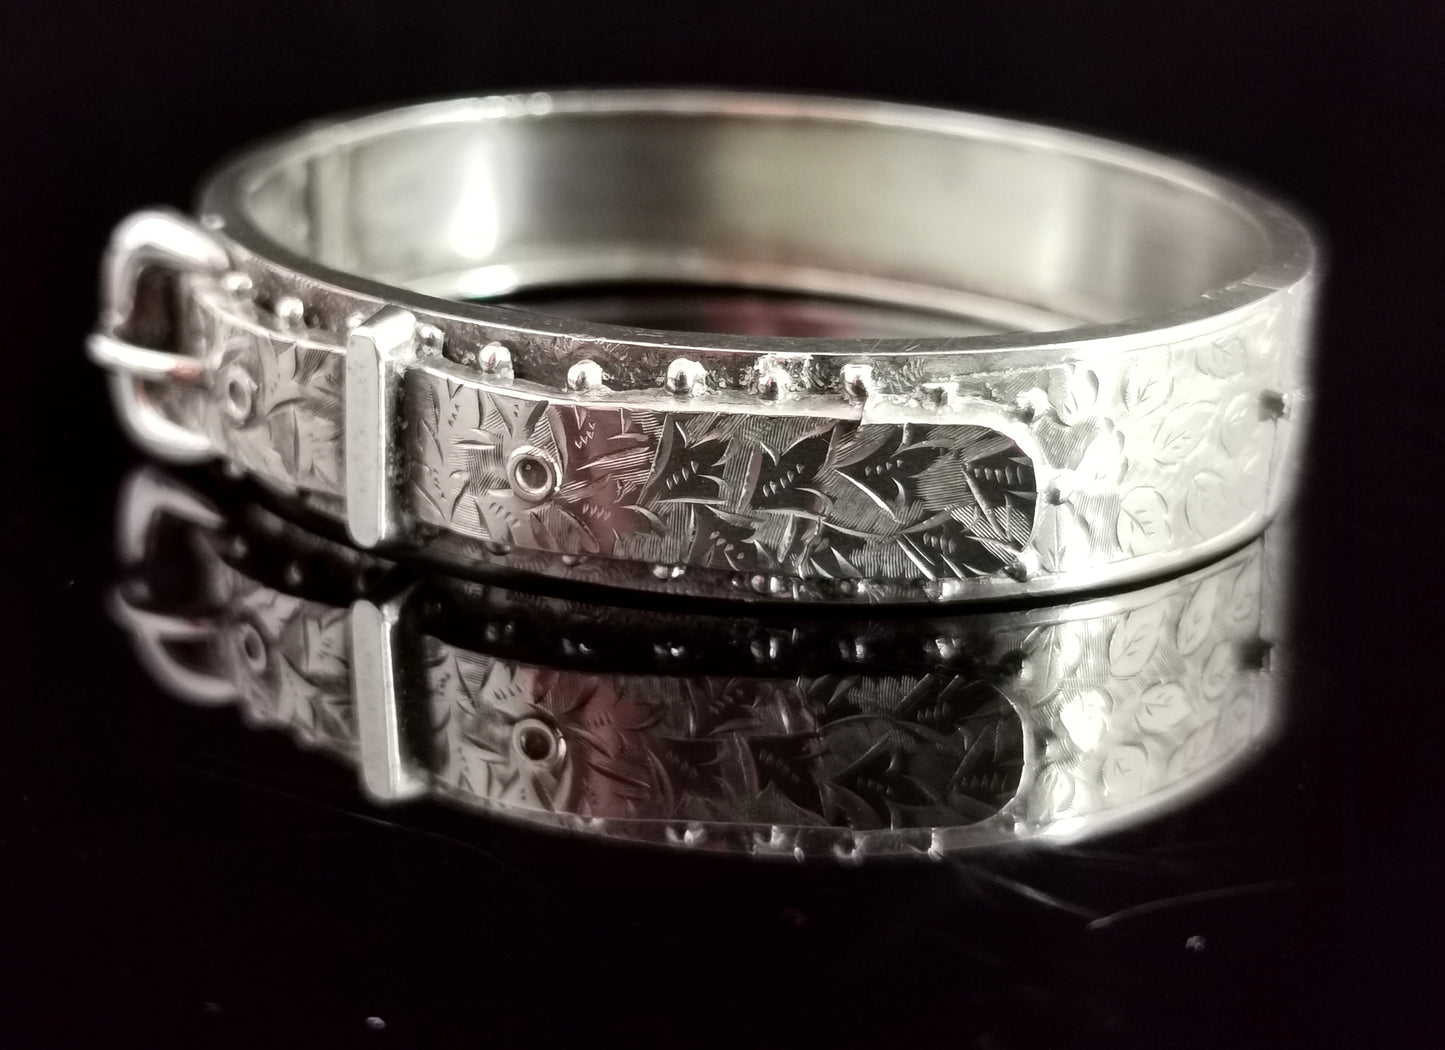 Victorian silver buckle bangle, ivy engraved